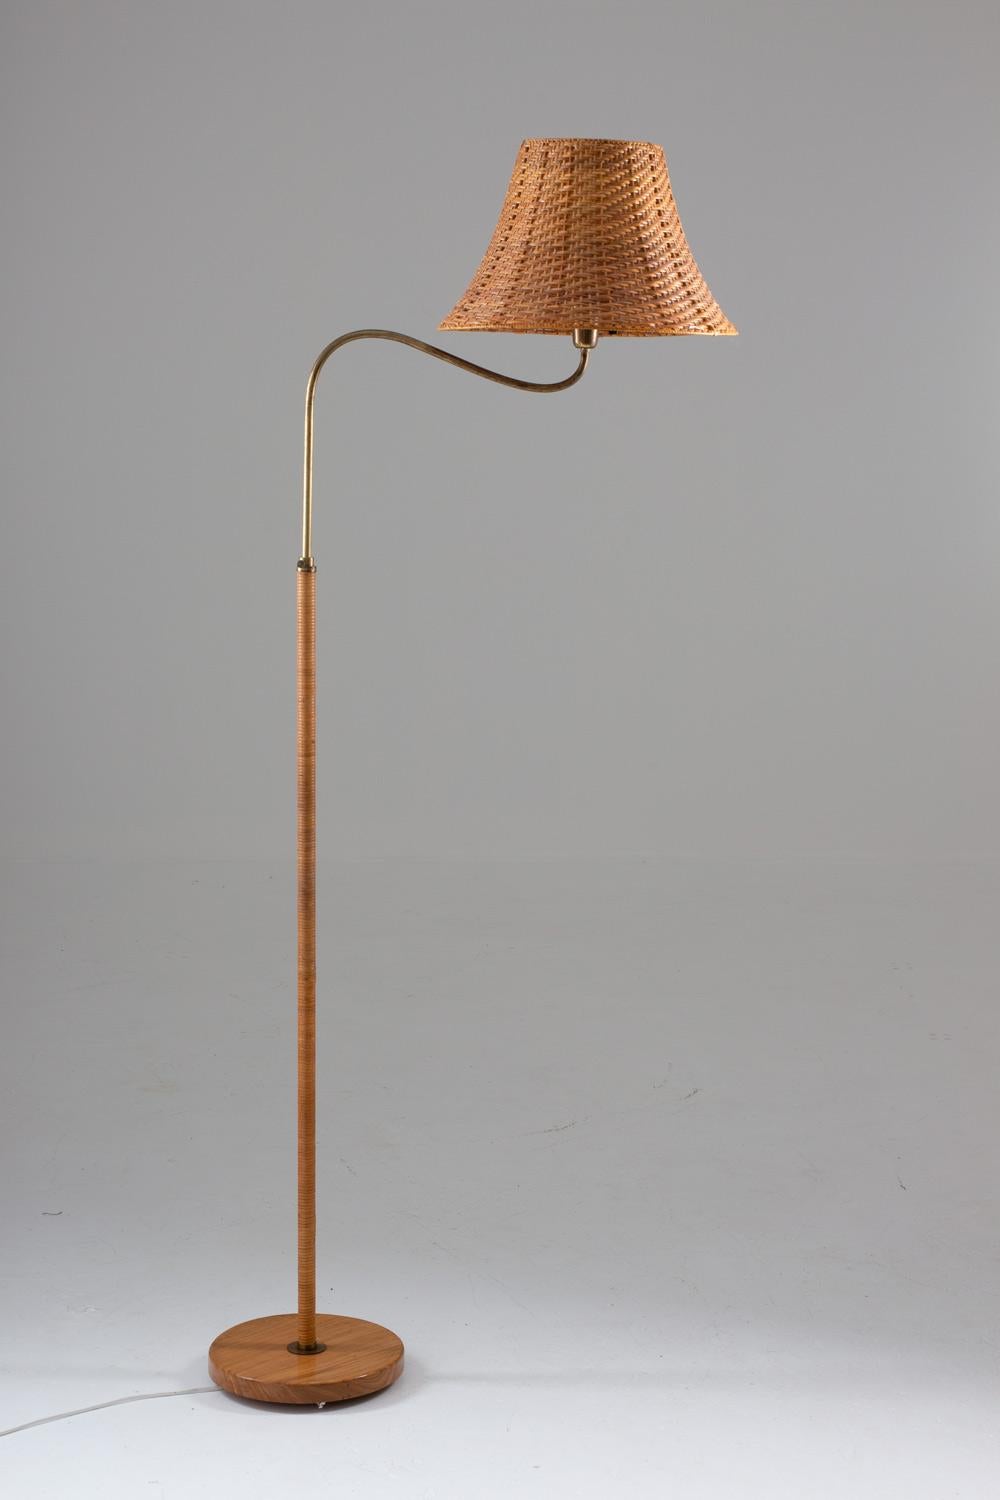 Rare floor lamp manufactured in Sweden, 1940s.
Very elegant lamp of beautiful design. The pole is entwined in rattan, with details in brass, such as the screw that makes it possible to adjust the height of the lamp. The swivel arm makes it perfect